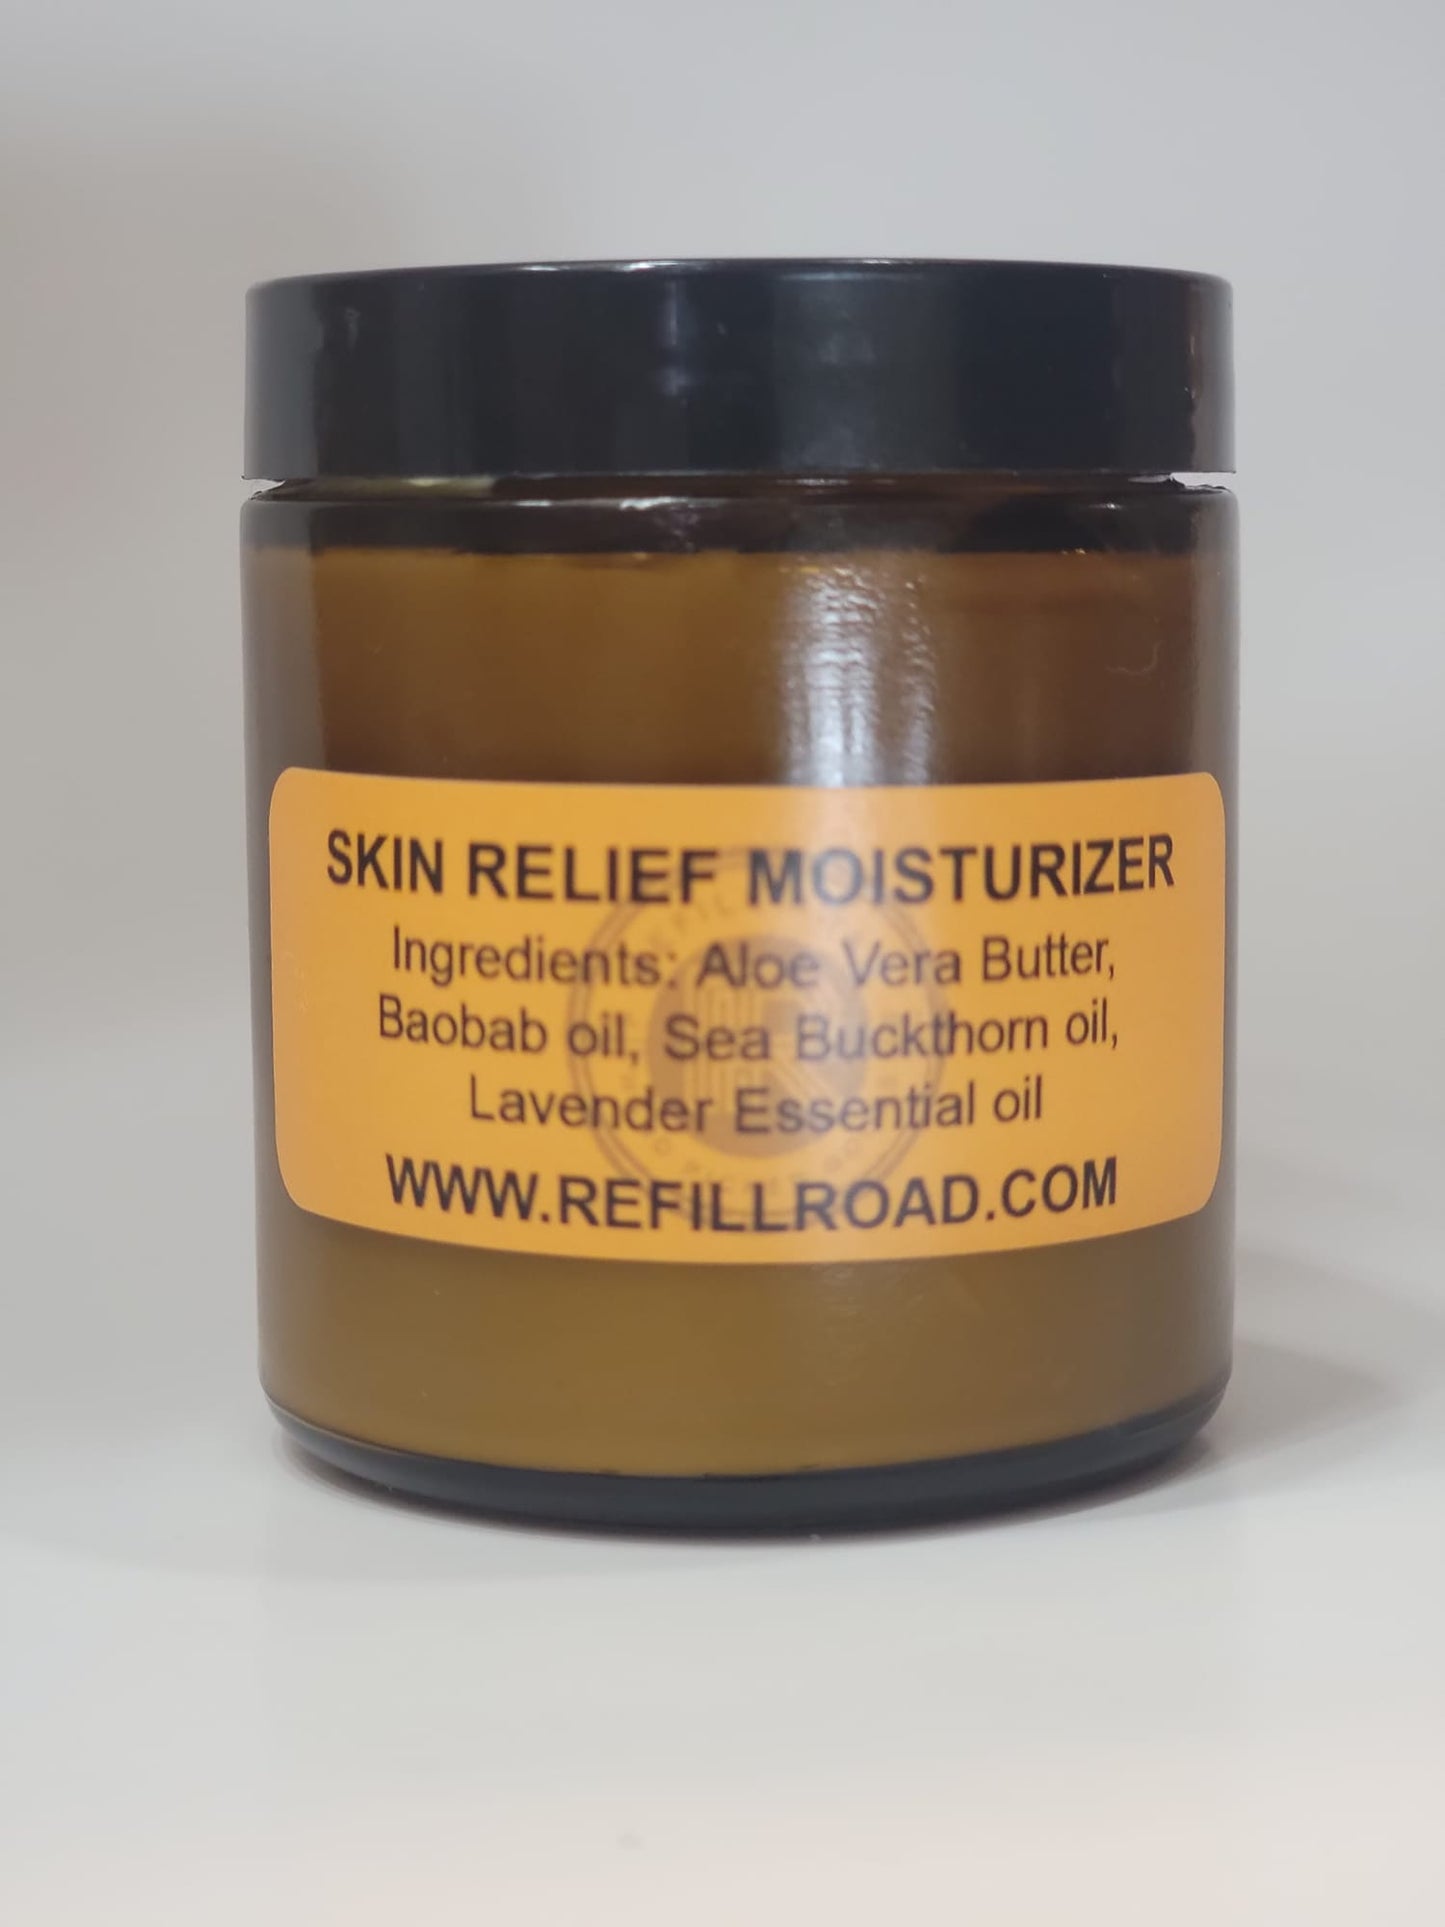 Moisturizer Skin Relief by Refill Road